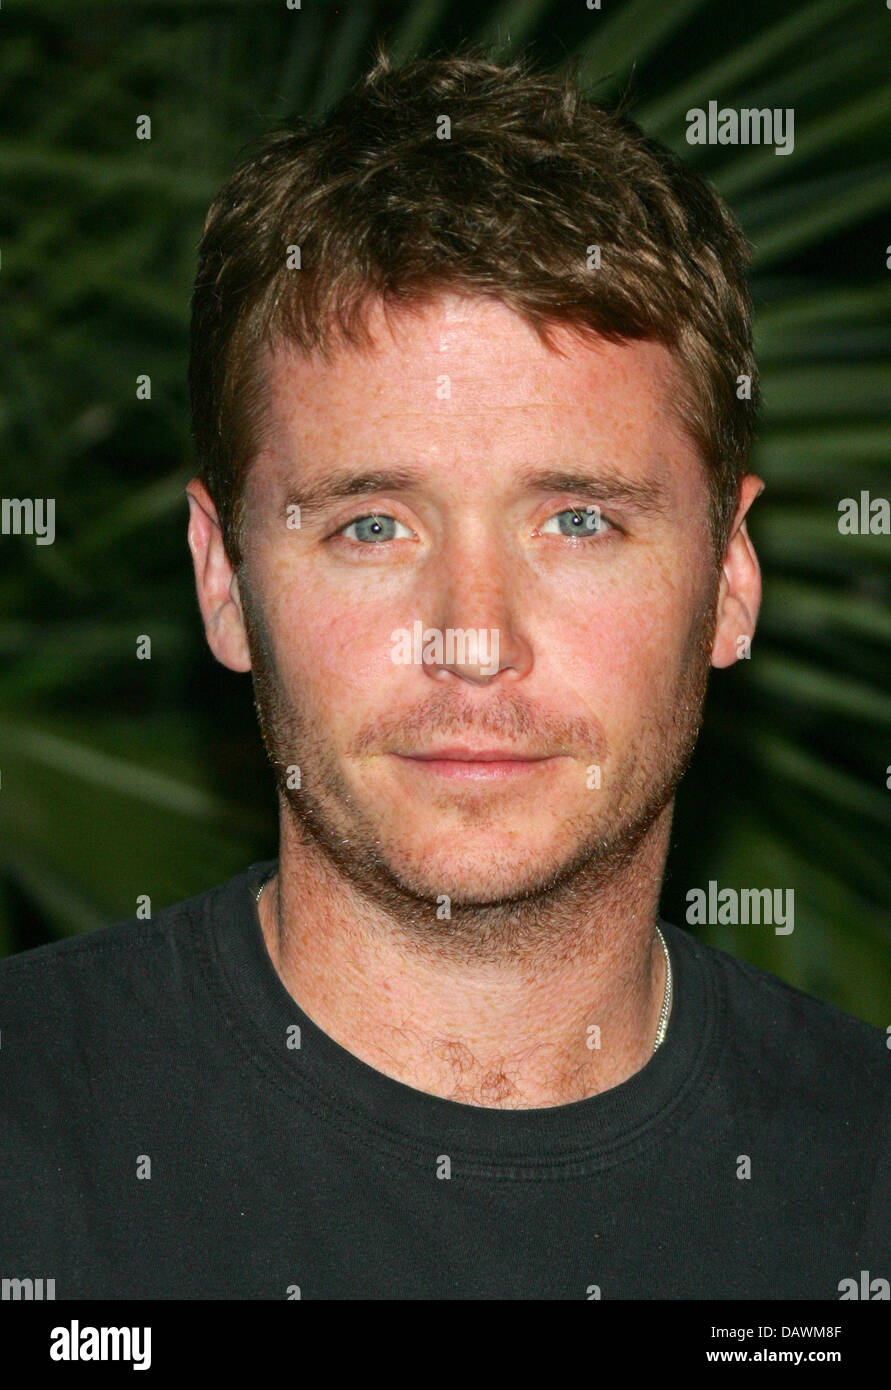 US actor Kevin Connolly smiles to the cameras as he arrives for the 40th anniversary party of US film company 'New Line Cinema' in Cannes, France, 22 May 2007. Photo: Hubert Boesl Stock Photo